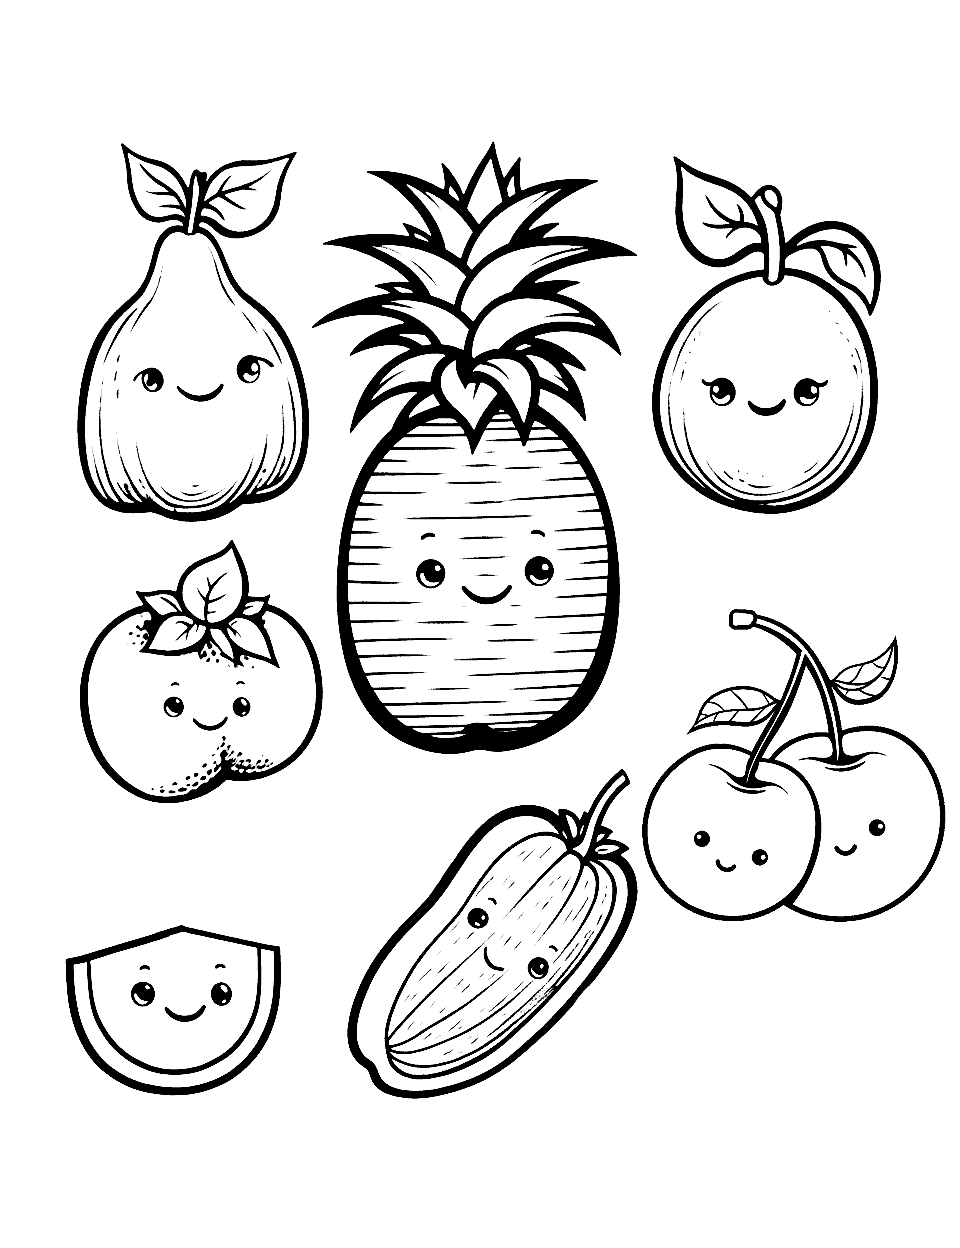 Fruit Faces Coloring Page - Different fruits, each with a unique and funny face.